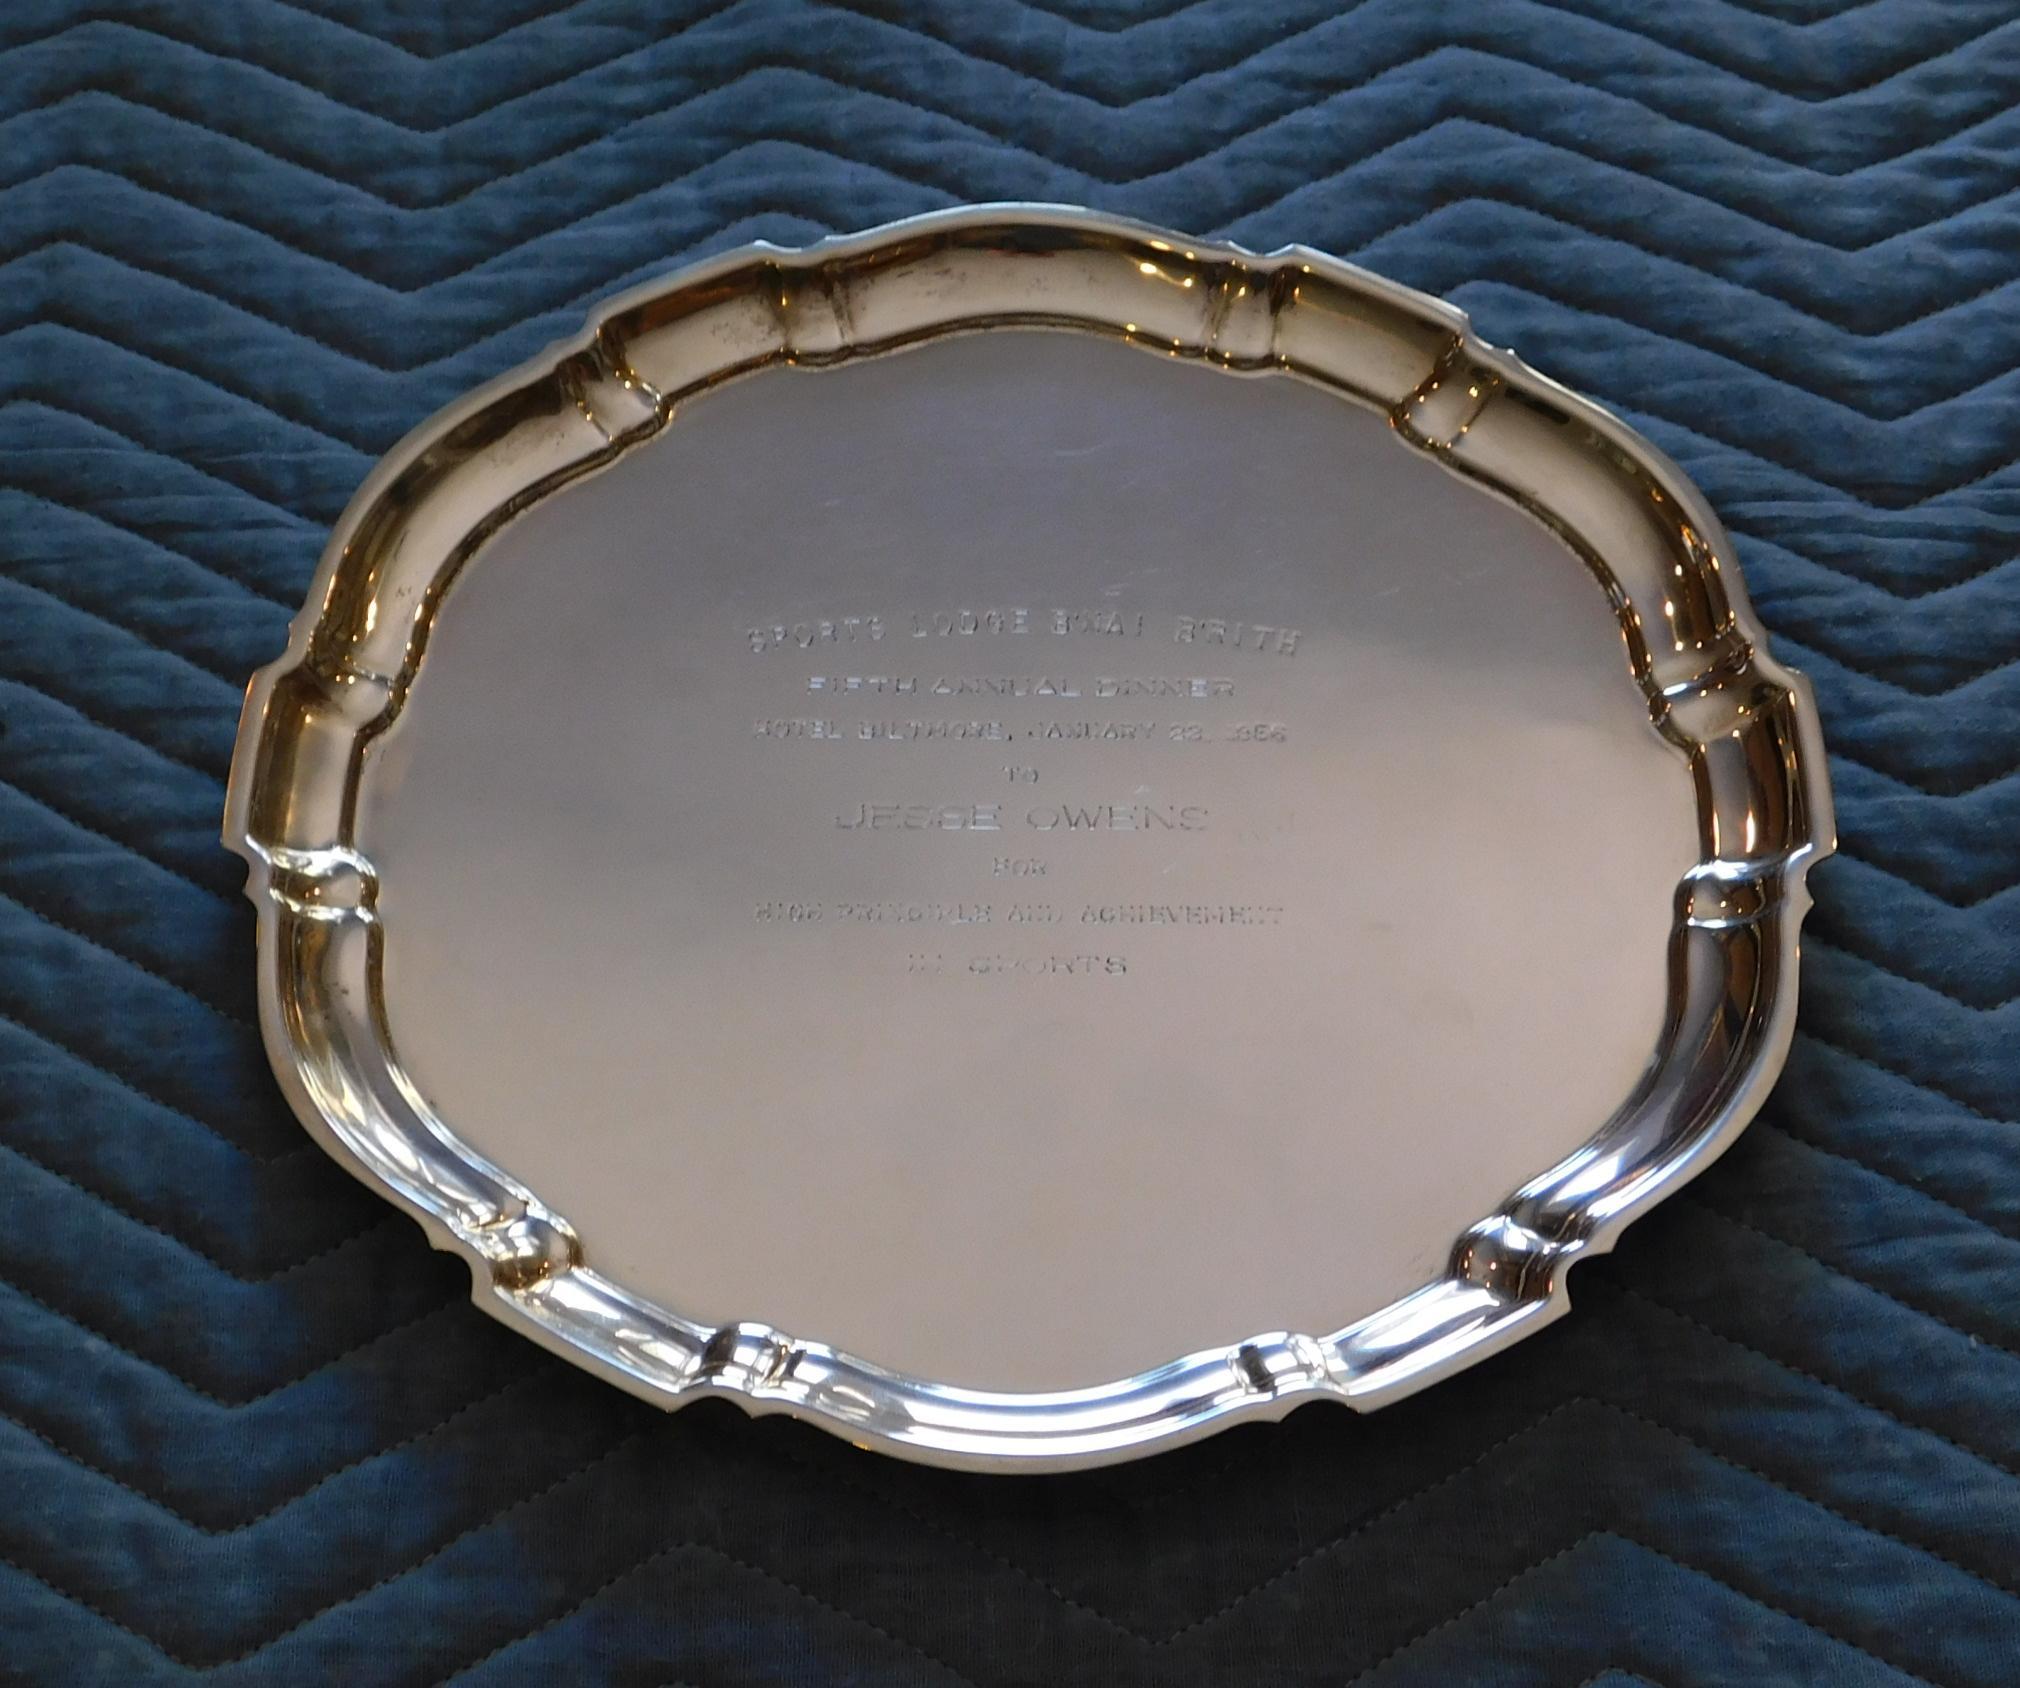 A Poole sterling silver Chippendale tray. 
The round tray has a molded and segmented border with an annotation at the center. 
The annotation reads: “Sports Lodge B’Nai B’Rith. Fifth annual Dinner. 
Hotel Biltmore, January 23, 1956. 
To Jesse Owens